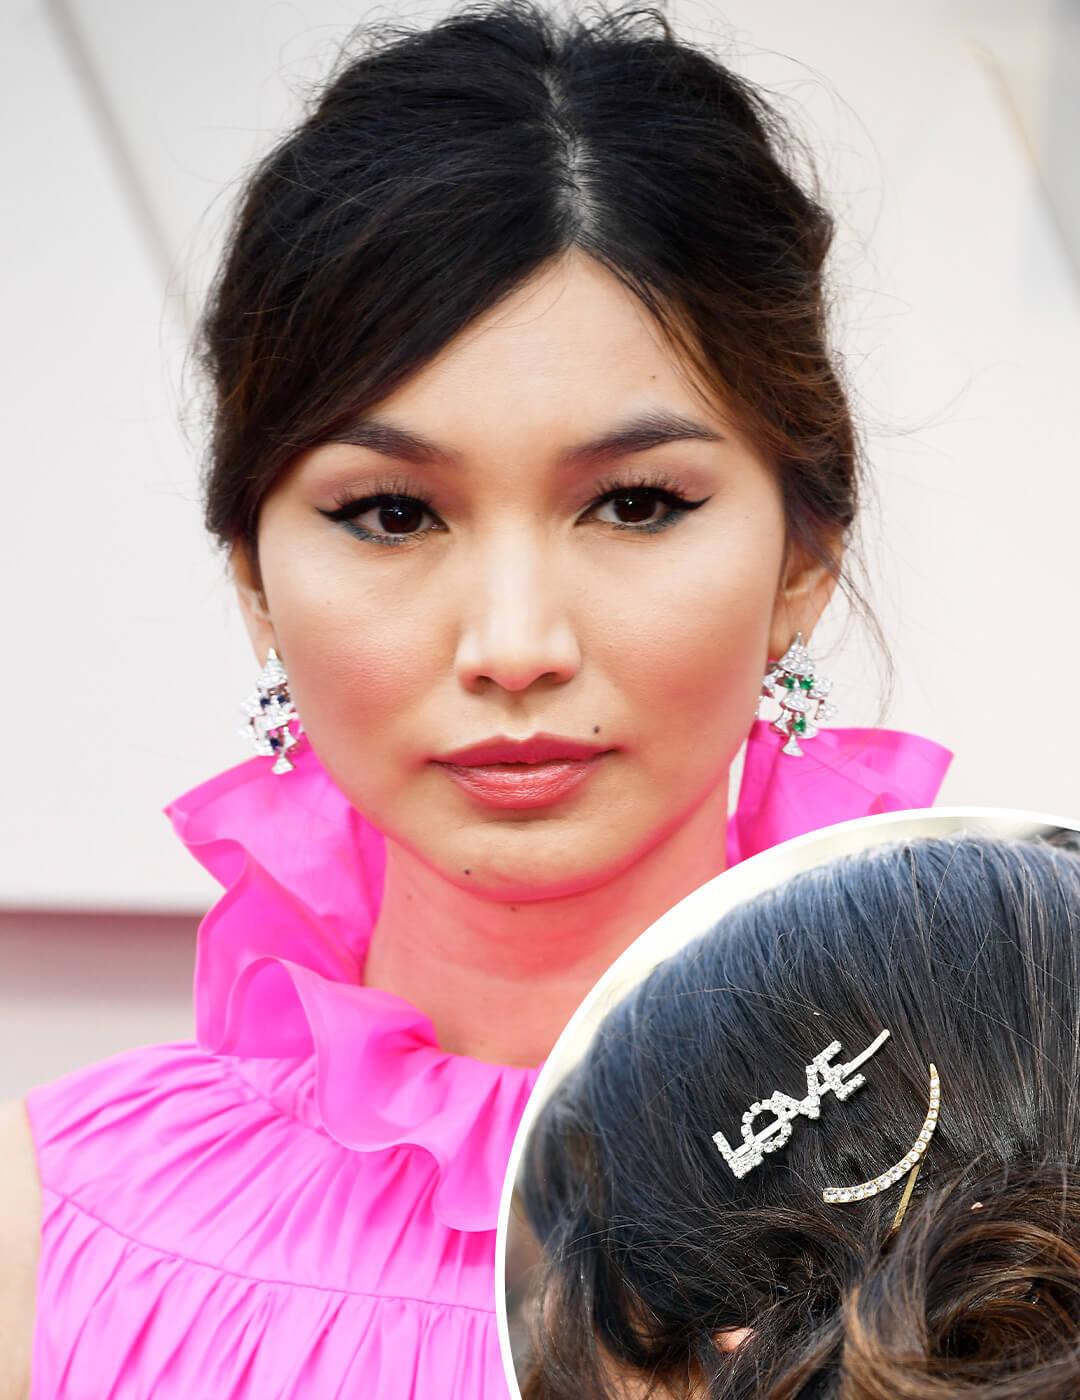 A photo of Gemma Chan with bejeweled barrette that says "LOVE"